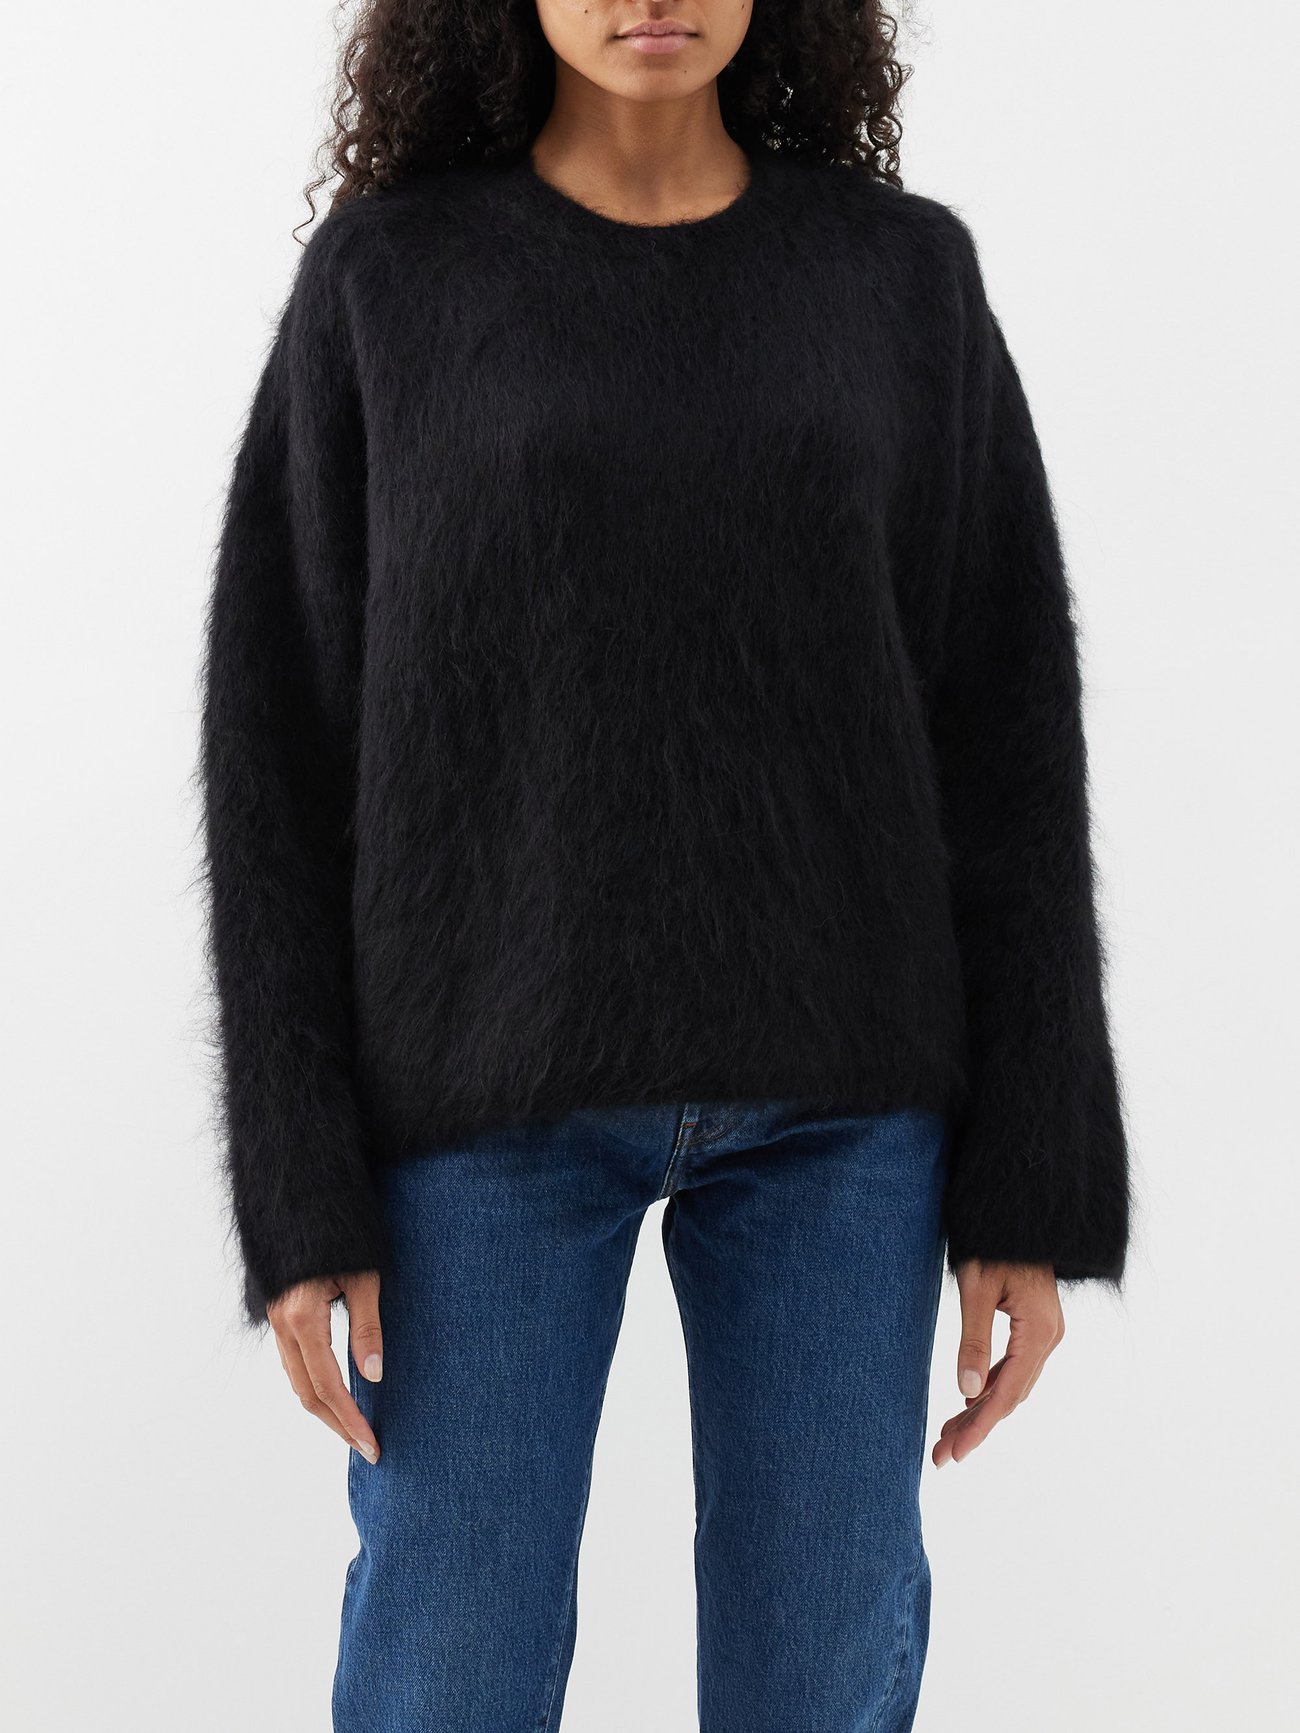 Toteme's black sweater is crafted from an alpaca blend that is lightweight and hairy to the touch and has dropped shoulders and a straight hem for a relaxed look.